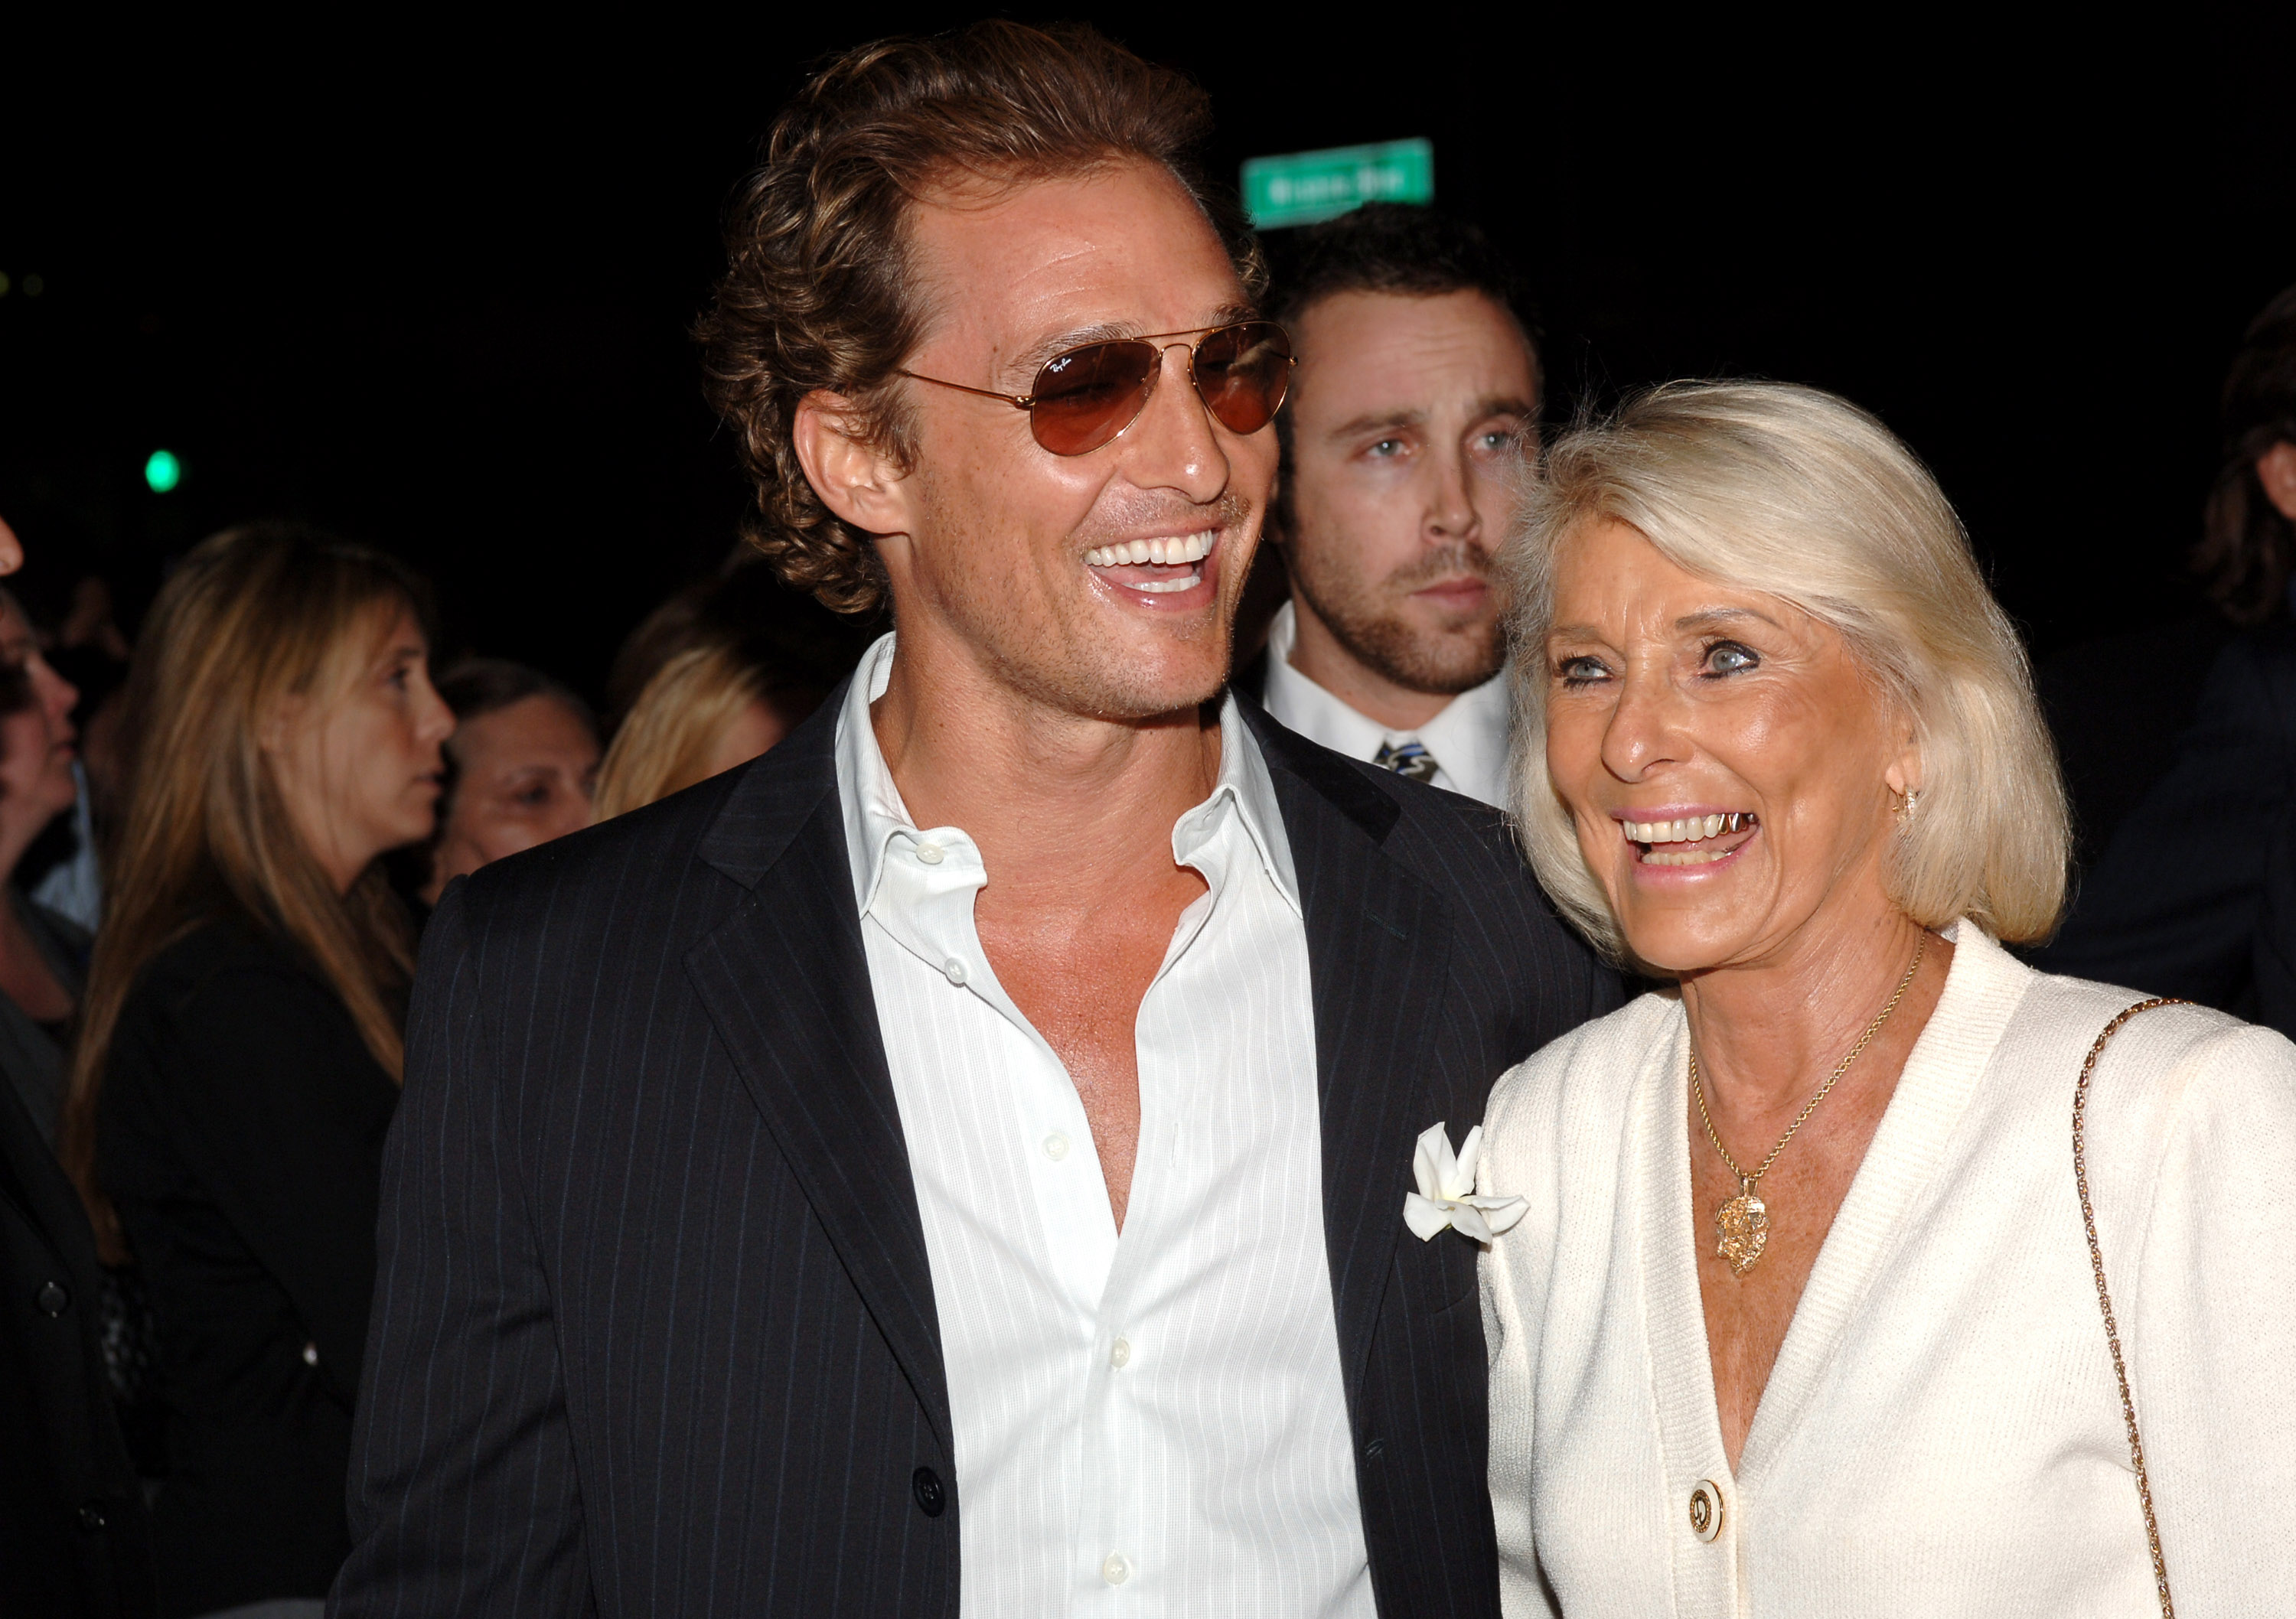 Matthew McConaughey and mother Kay McConaughey at the "Two for the Money" premiere on September 27, 2005. | Source: Getty Images